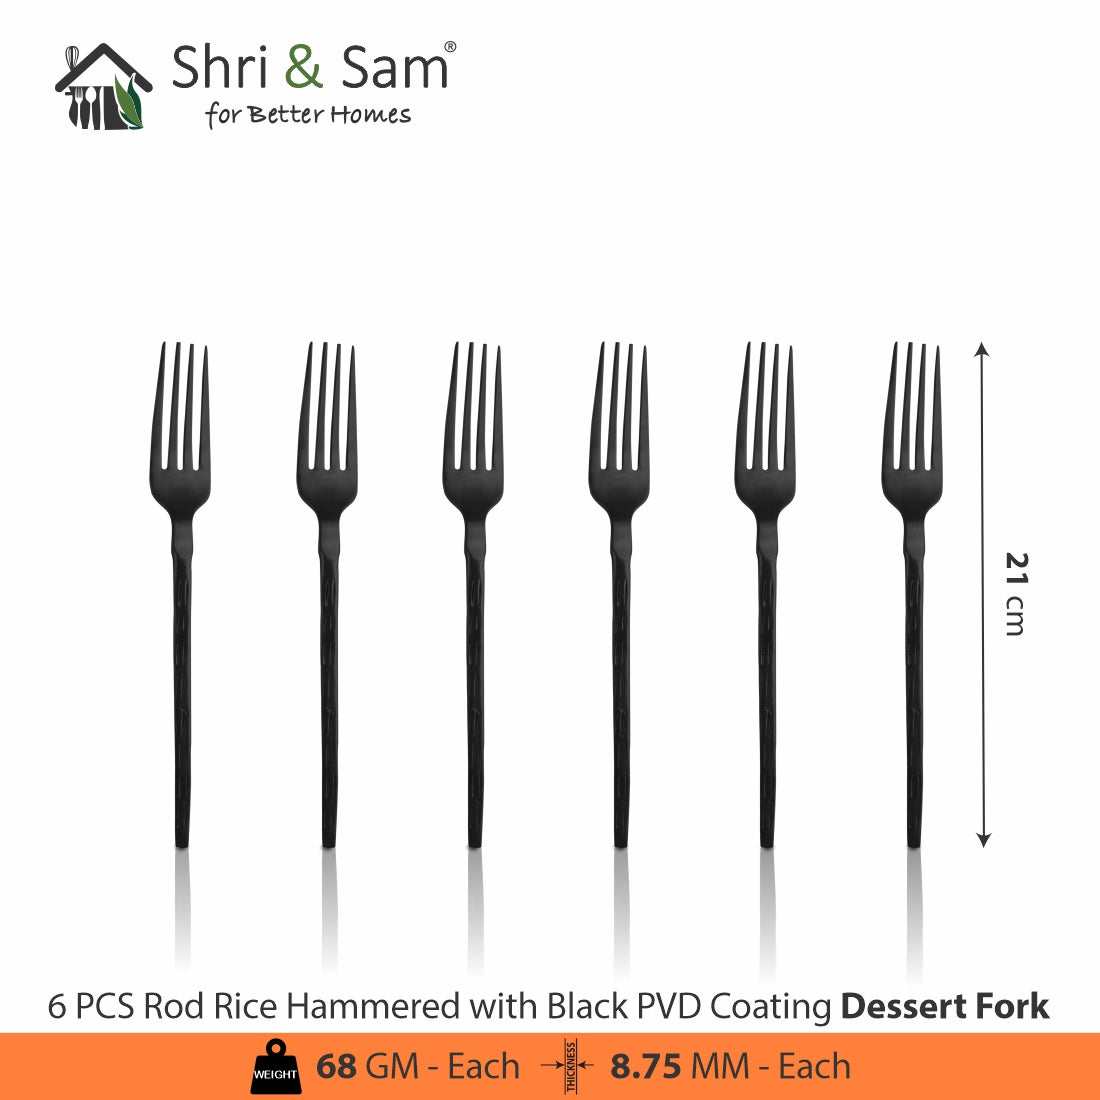 Stainless Steel Hand Crafted 24 PCS Cutlery Set with PVD Coating Rod Rice Hammered